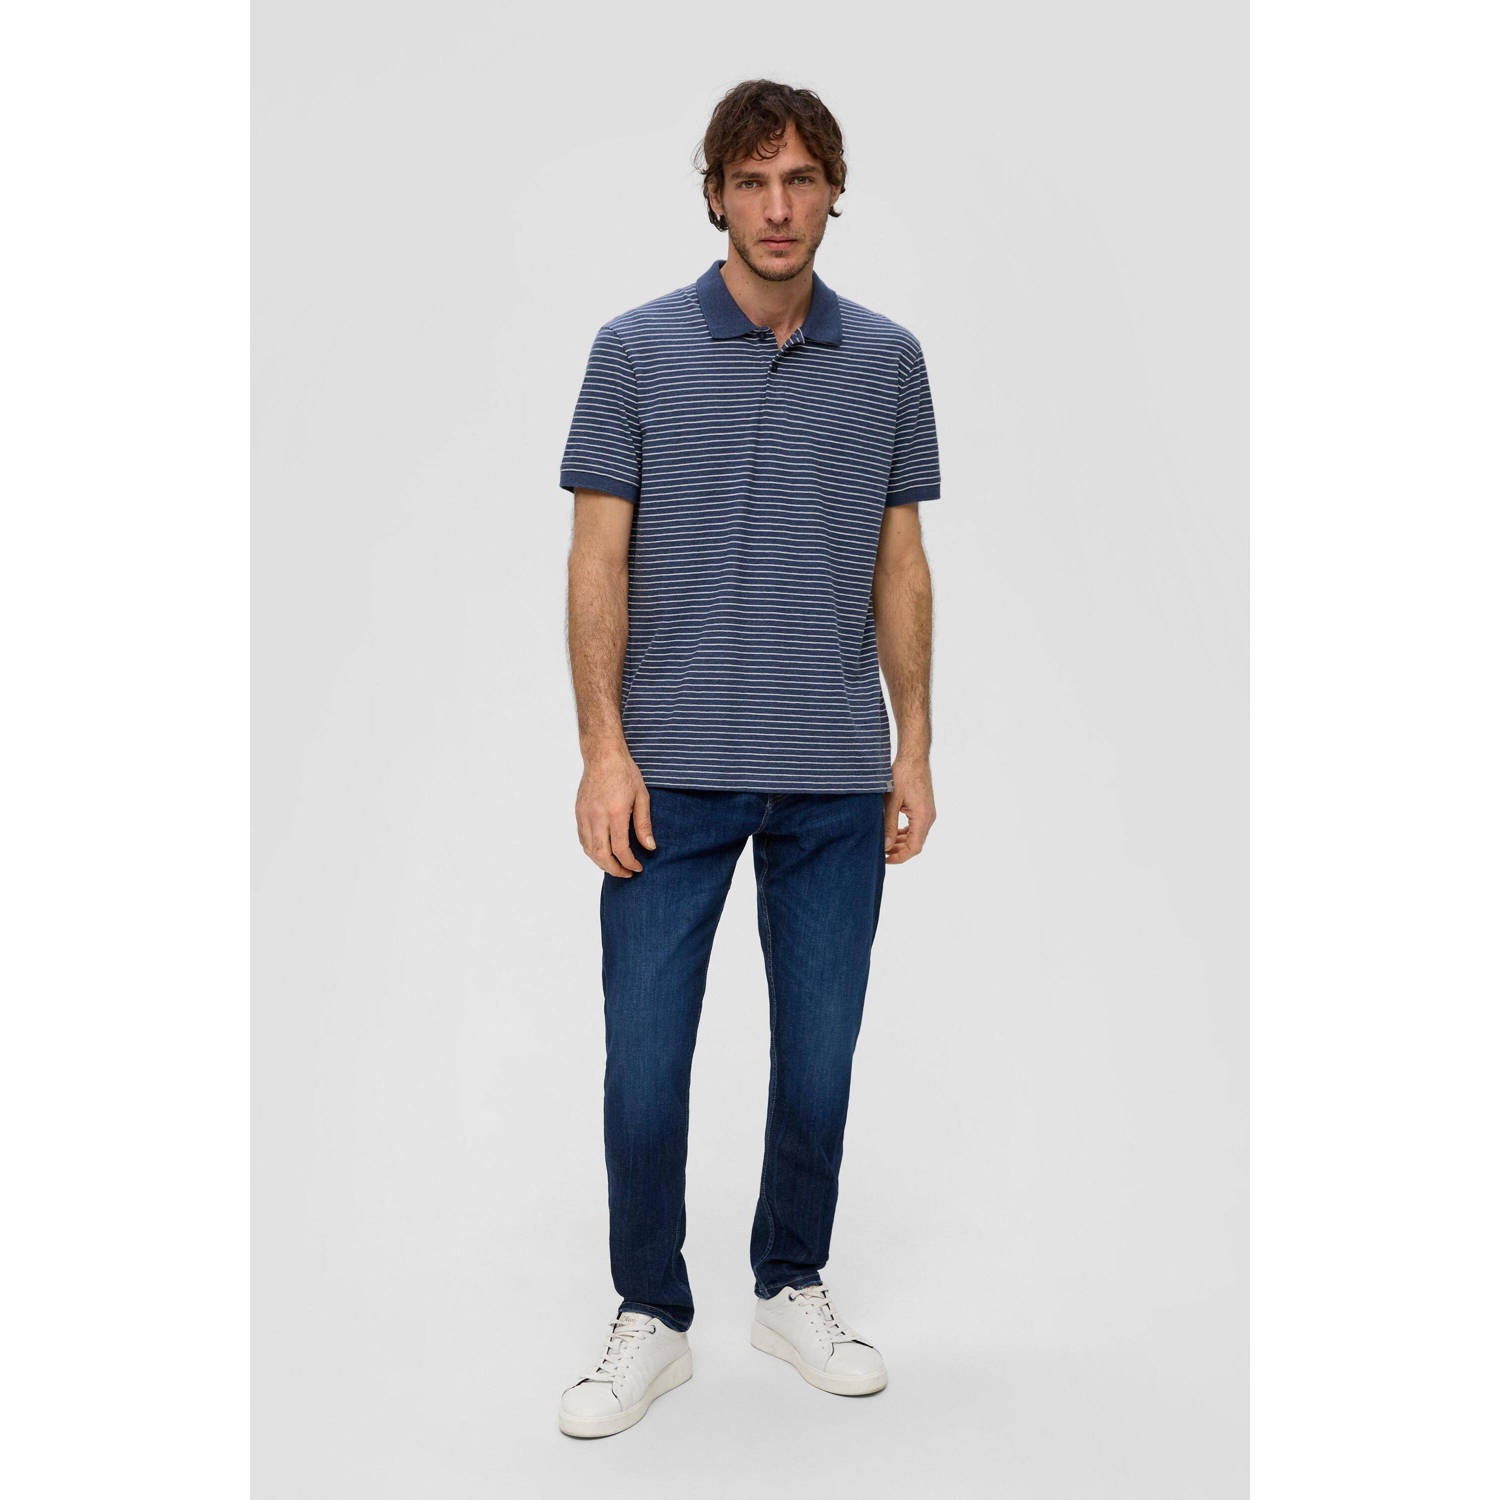 s.Oliver gestreepte regular fit polo blauw